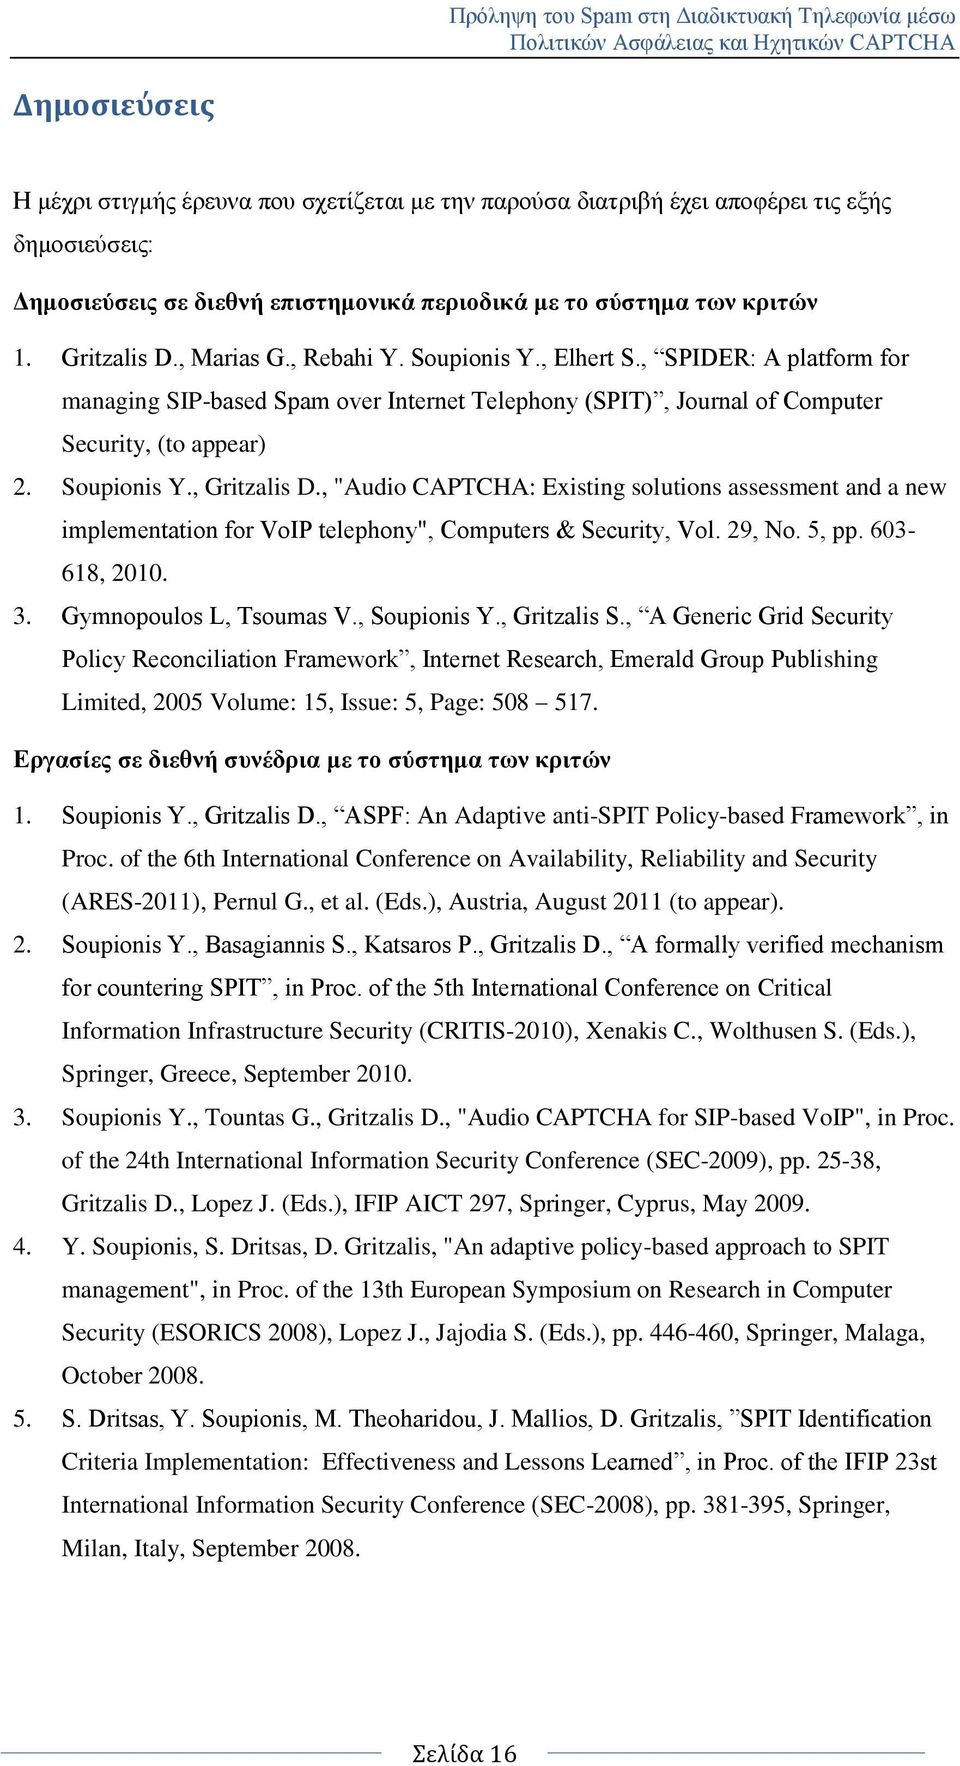 , "Audio CAPTCHA: Existing solutions assessment and a new implementation for VoIP telephony", Computers & Security, Vol. 29, Νν. 5, pp. 603-618, 2010. 3. Gymnopoulos L, Tsoumas V., Soupionis Y.